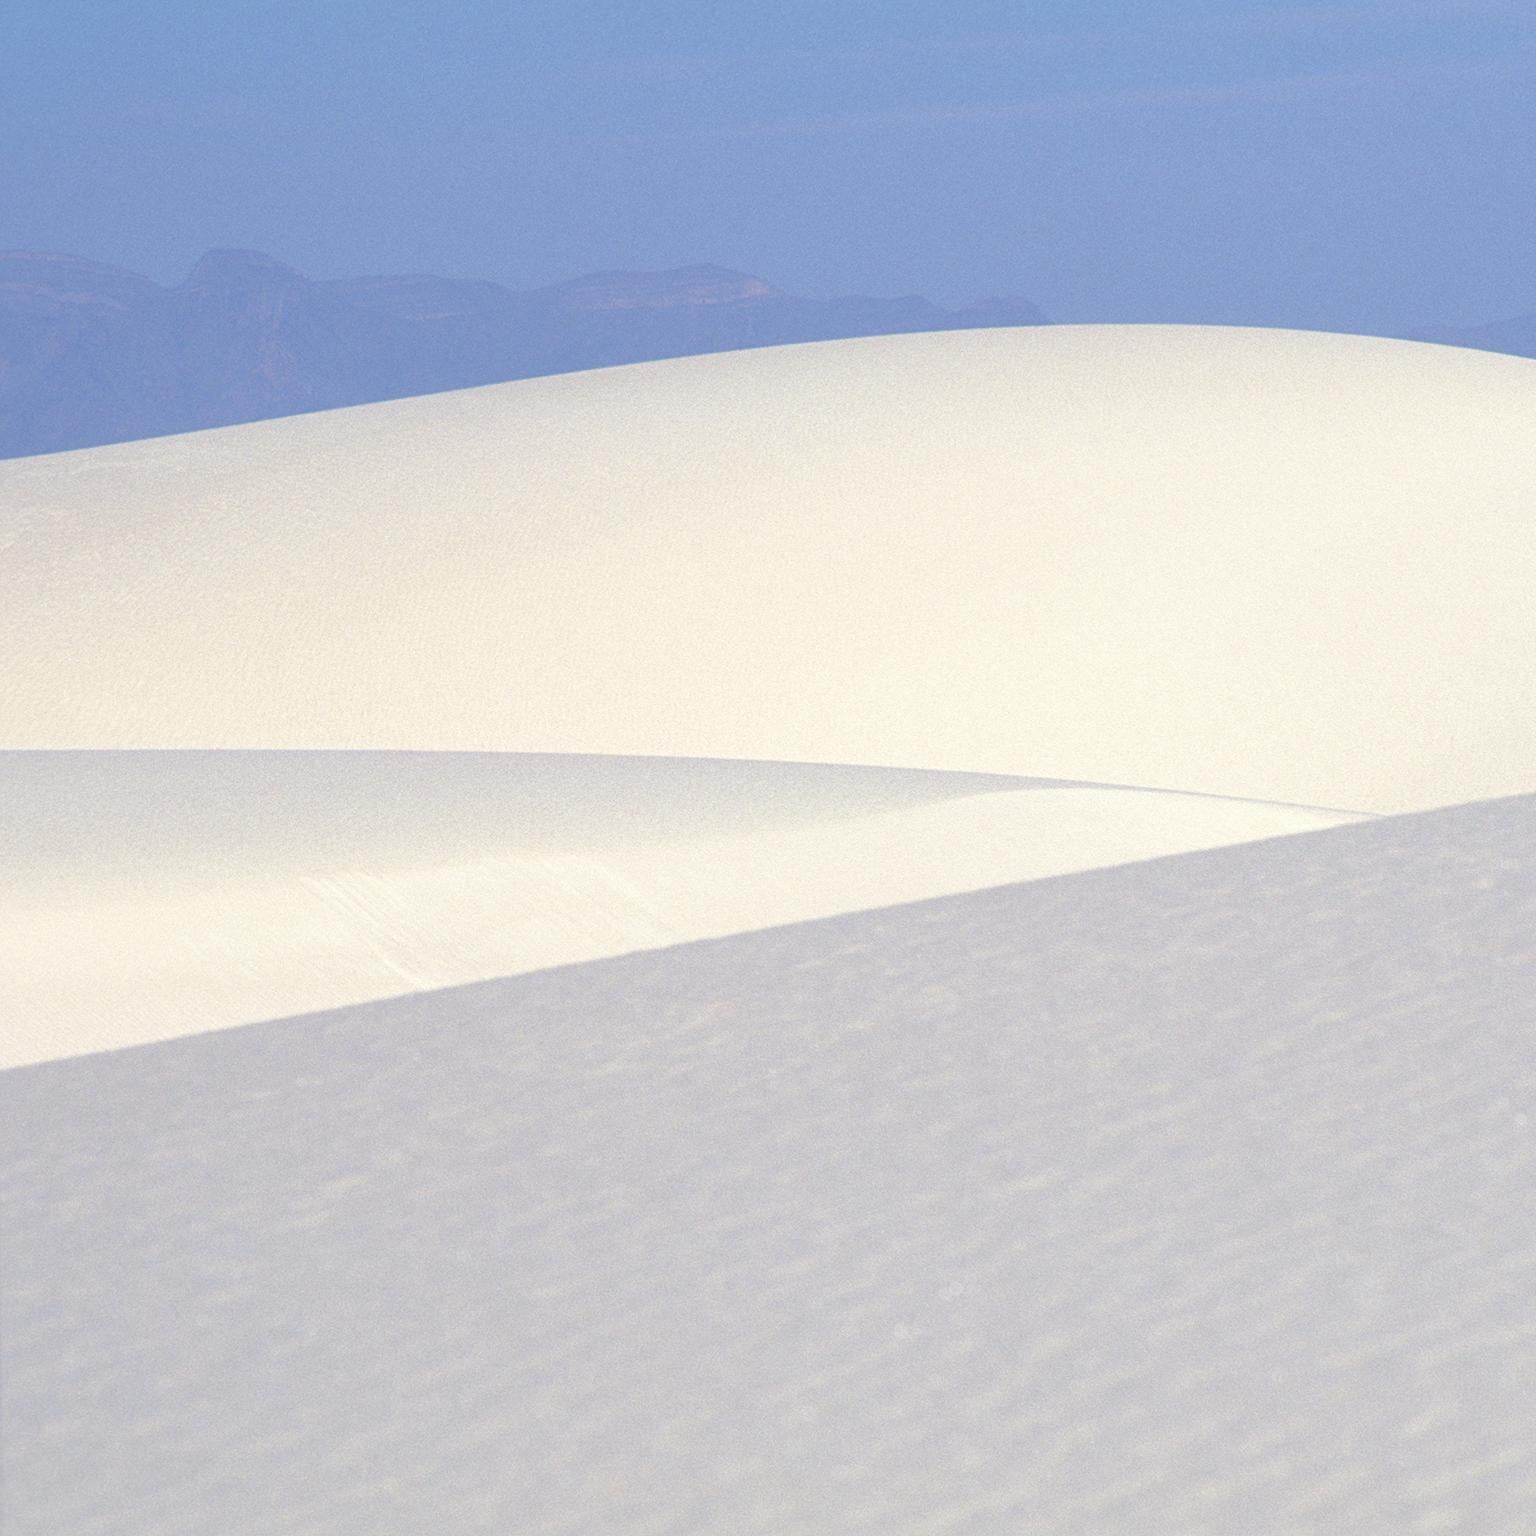 White Sands National Park, USA, 2004, Vers. 1 - Photograph by  Cosmo Condina